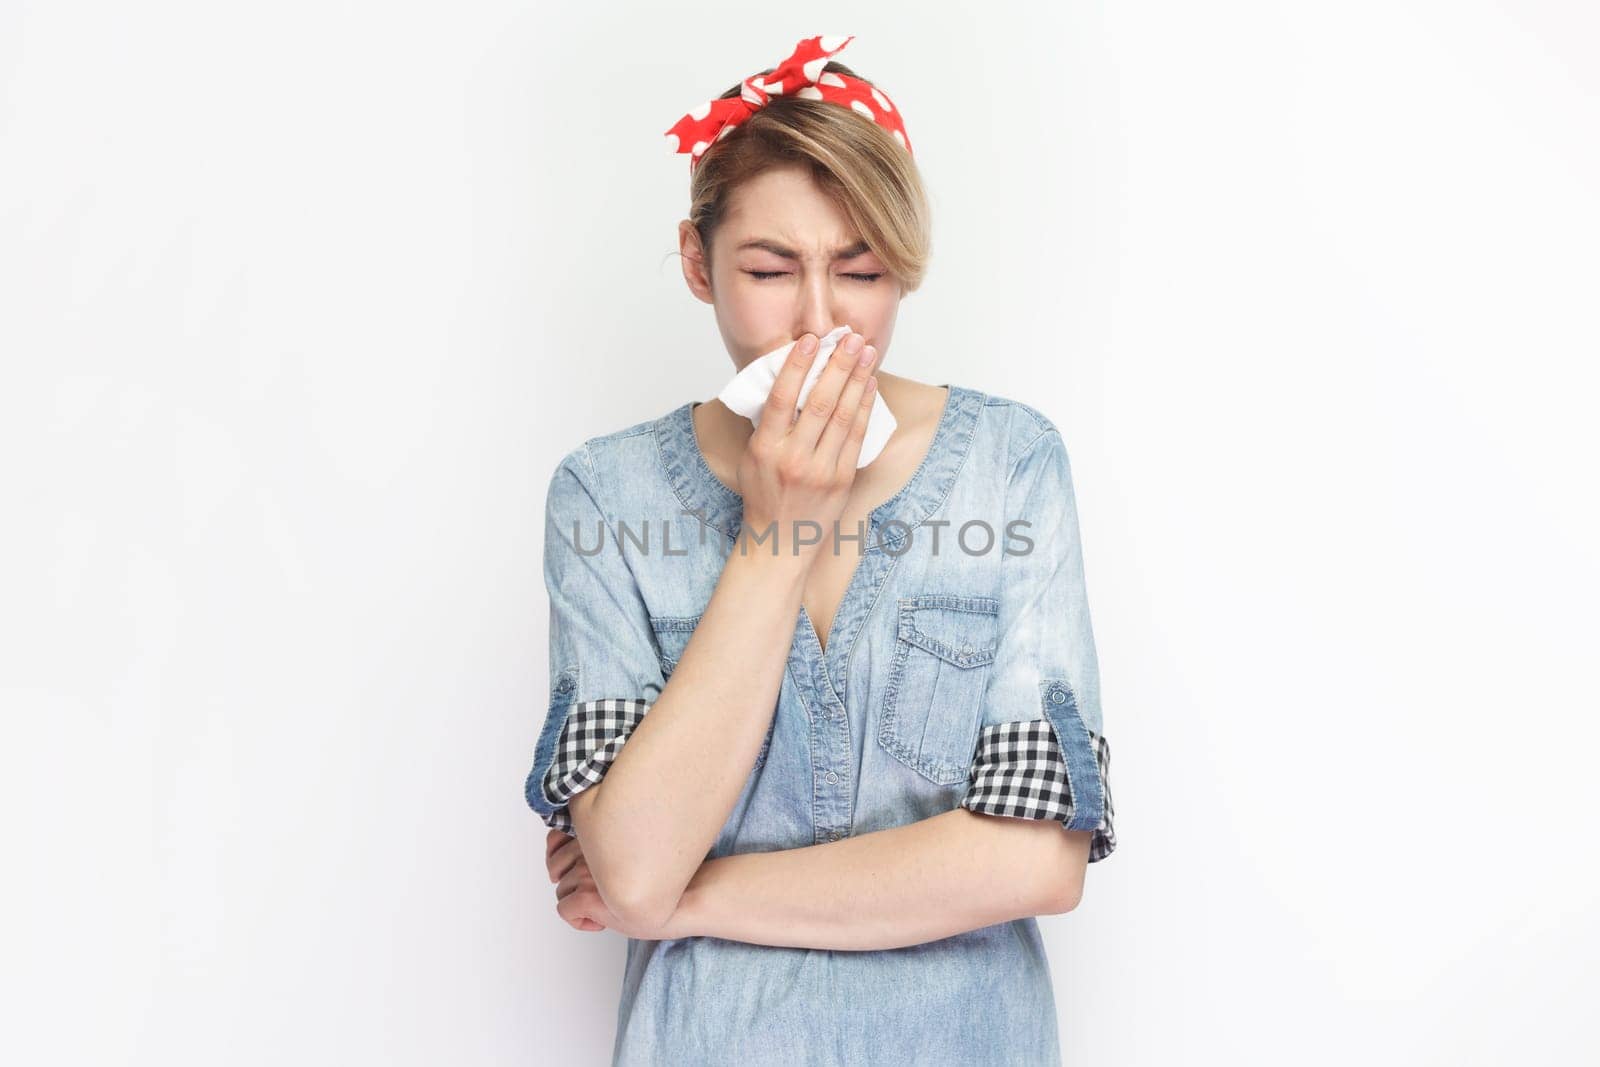 Portrait of sick unhealthy blonde woman wearing blue denim shirt and red headband standing suffering runny nose, having grippe symptoms. Indoor studio shot isolated on gray background.